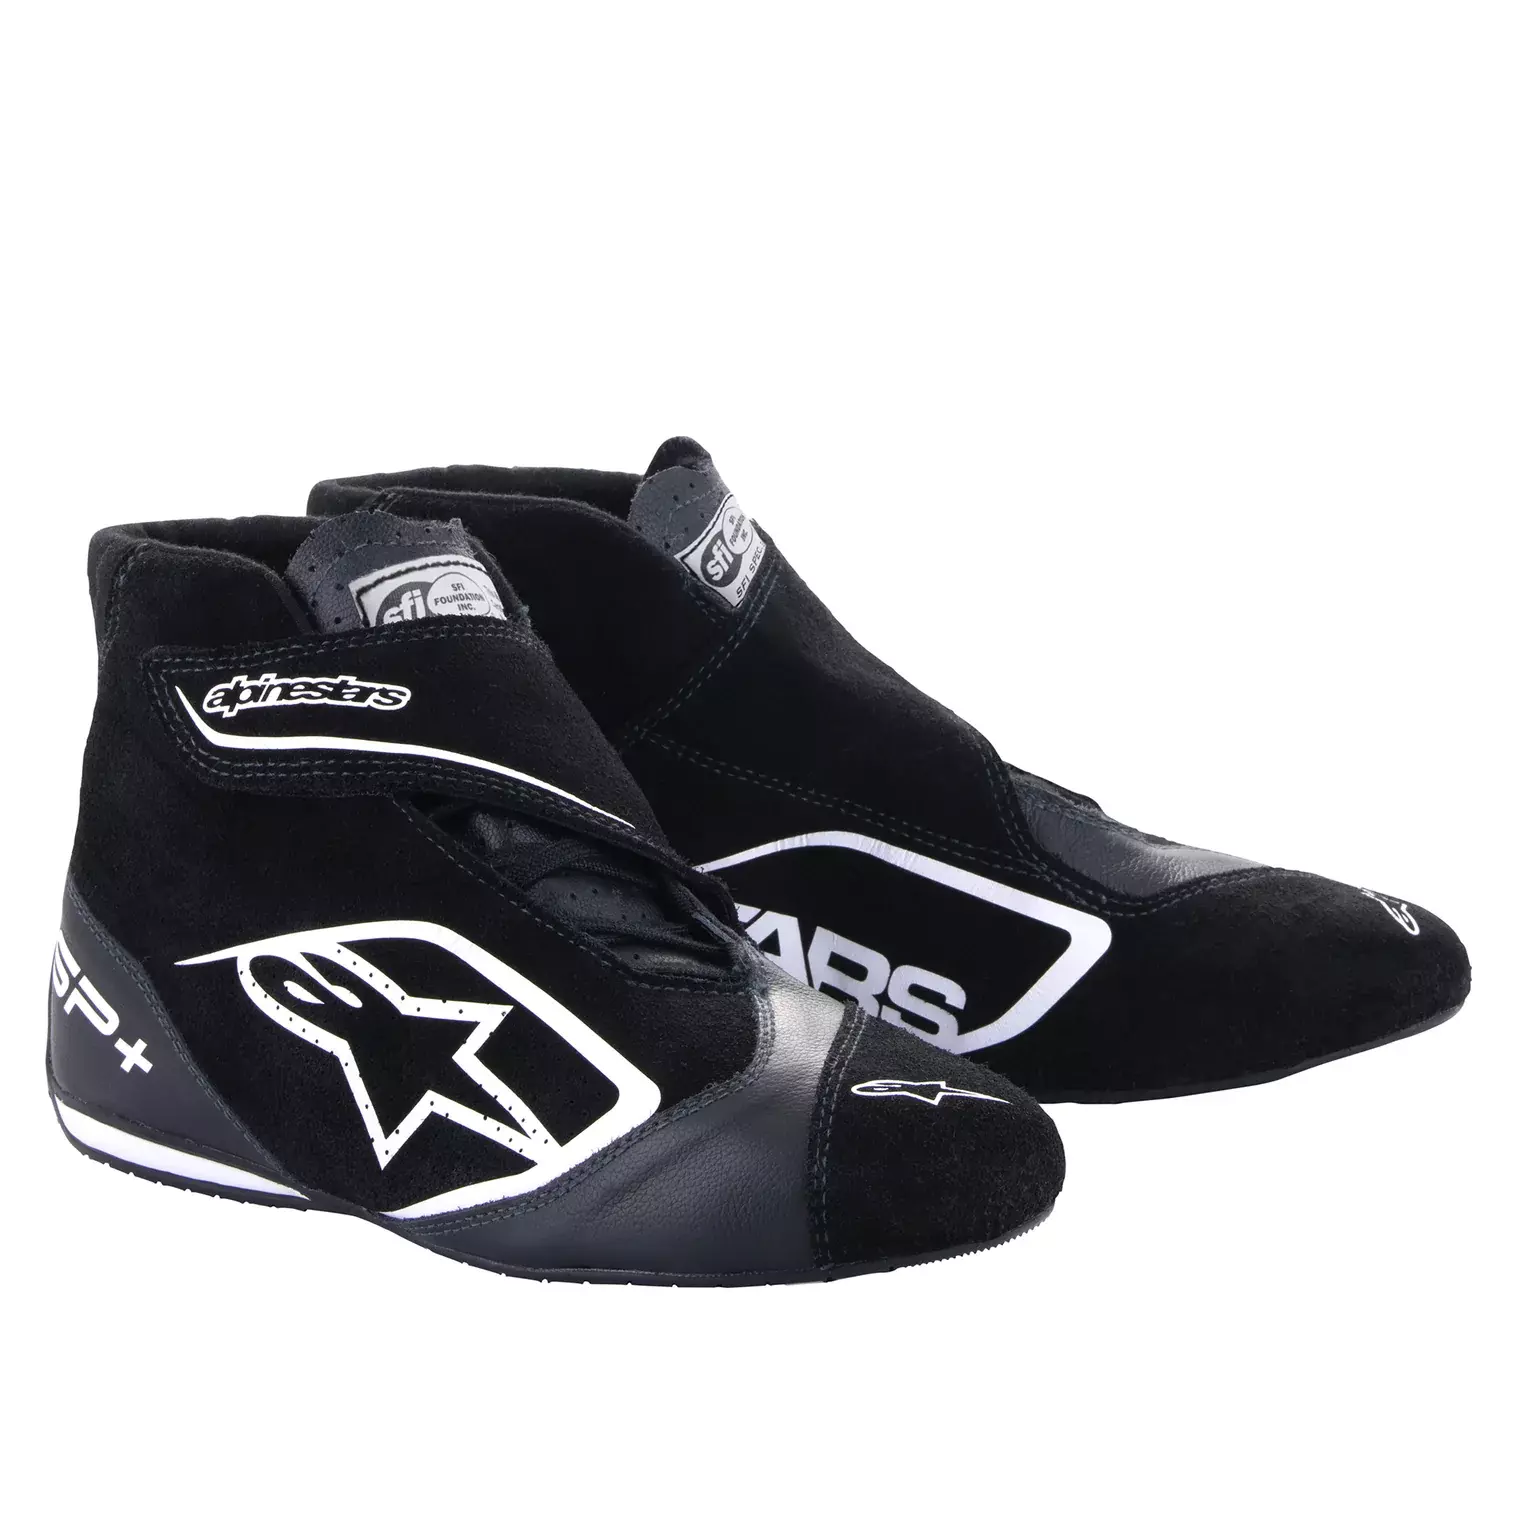 Alpinestars 2710823-12-10.5 Driving Shoe, SP+, Mid-Top, SFI 3.3, FIA Approved, Suede Outer, Nomex Inner, Black / White, Size 10.5, Pair